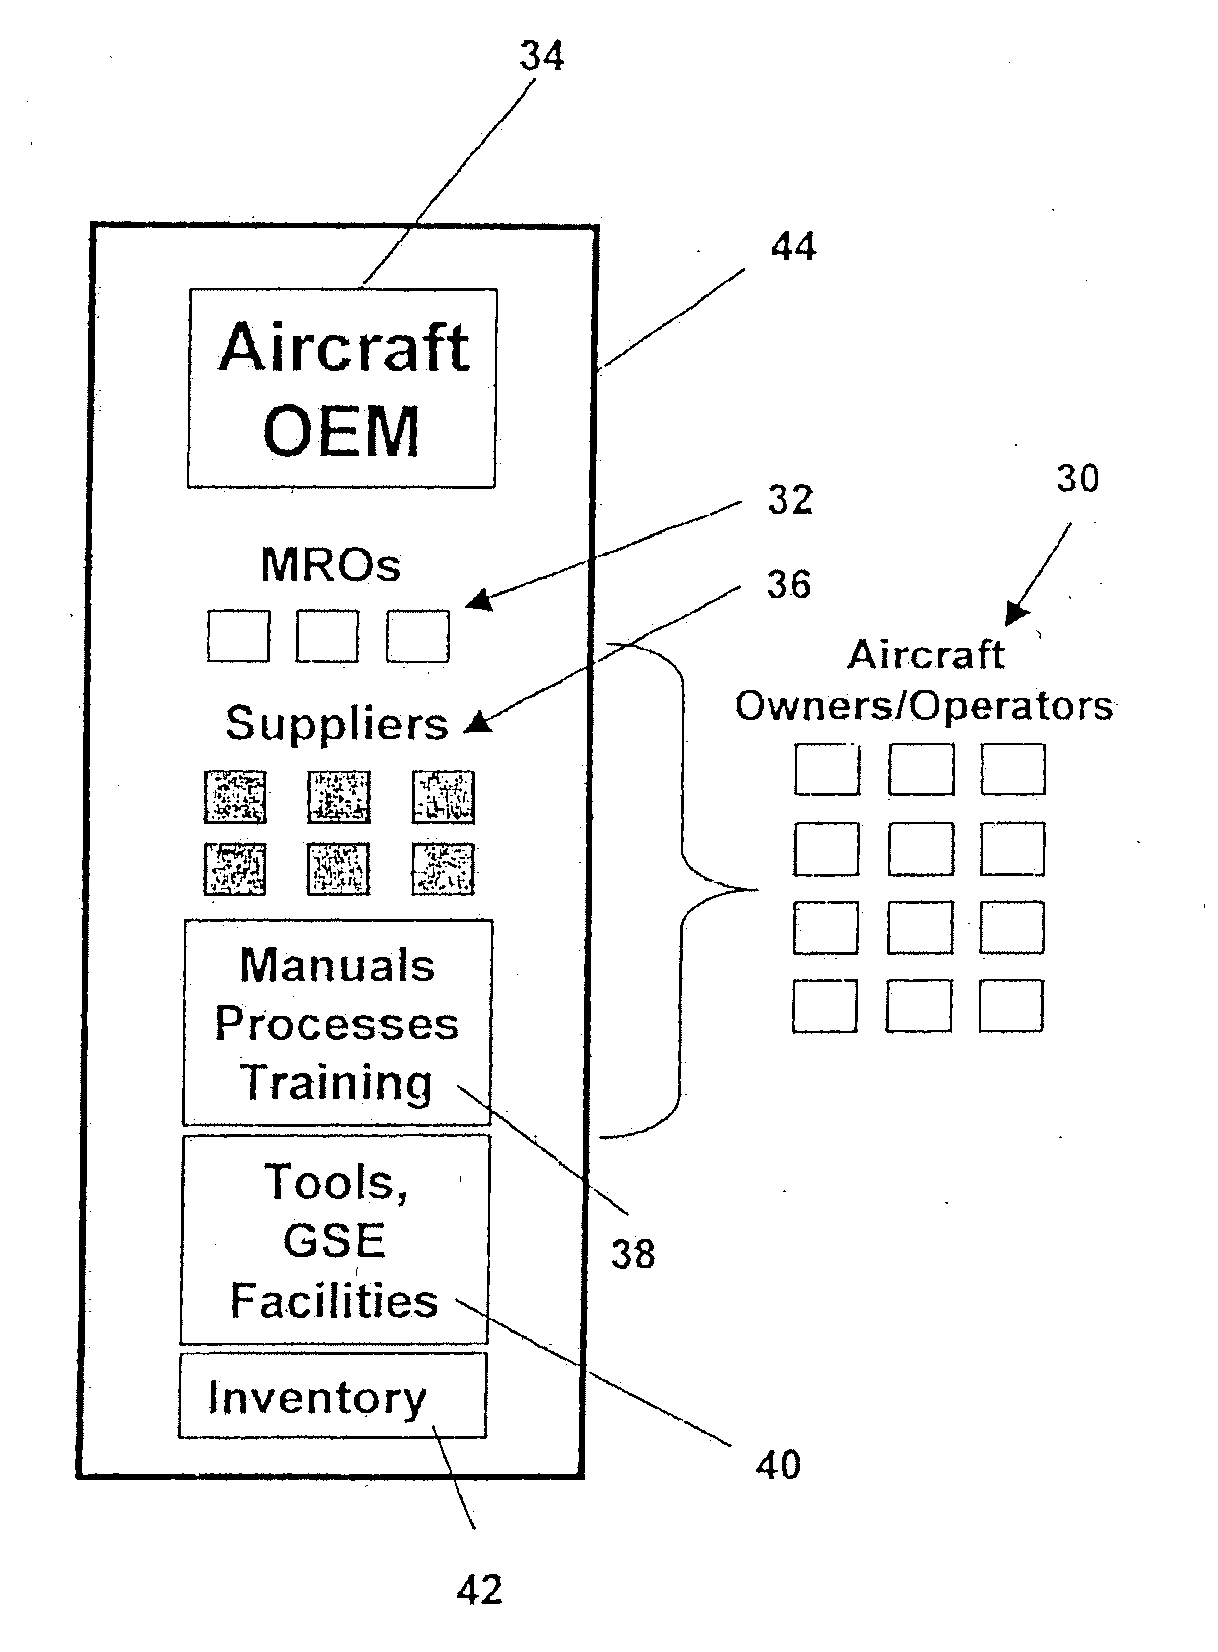 Central server for managing maintenance and materials for commercial aircraft fleets with fleet-wide benchmarking data